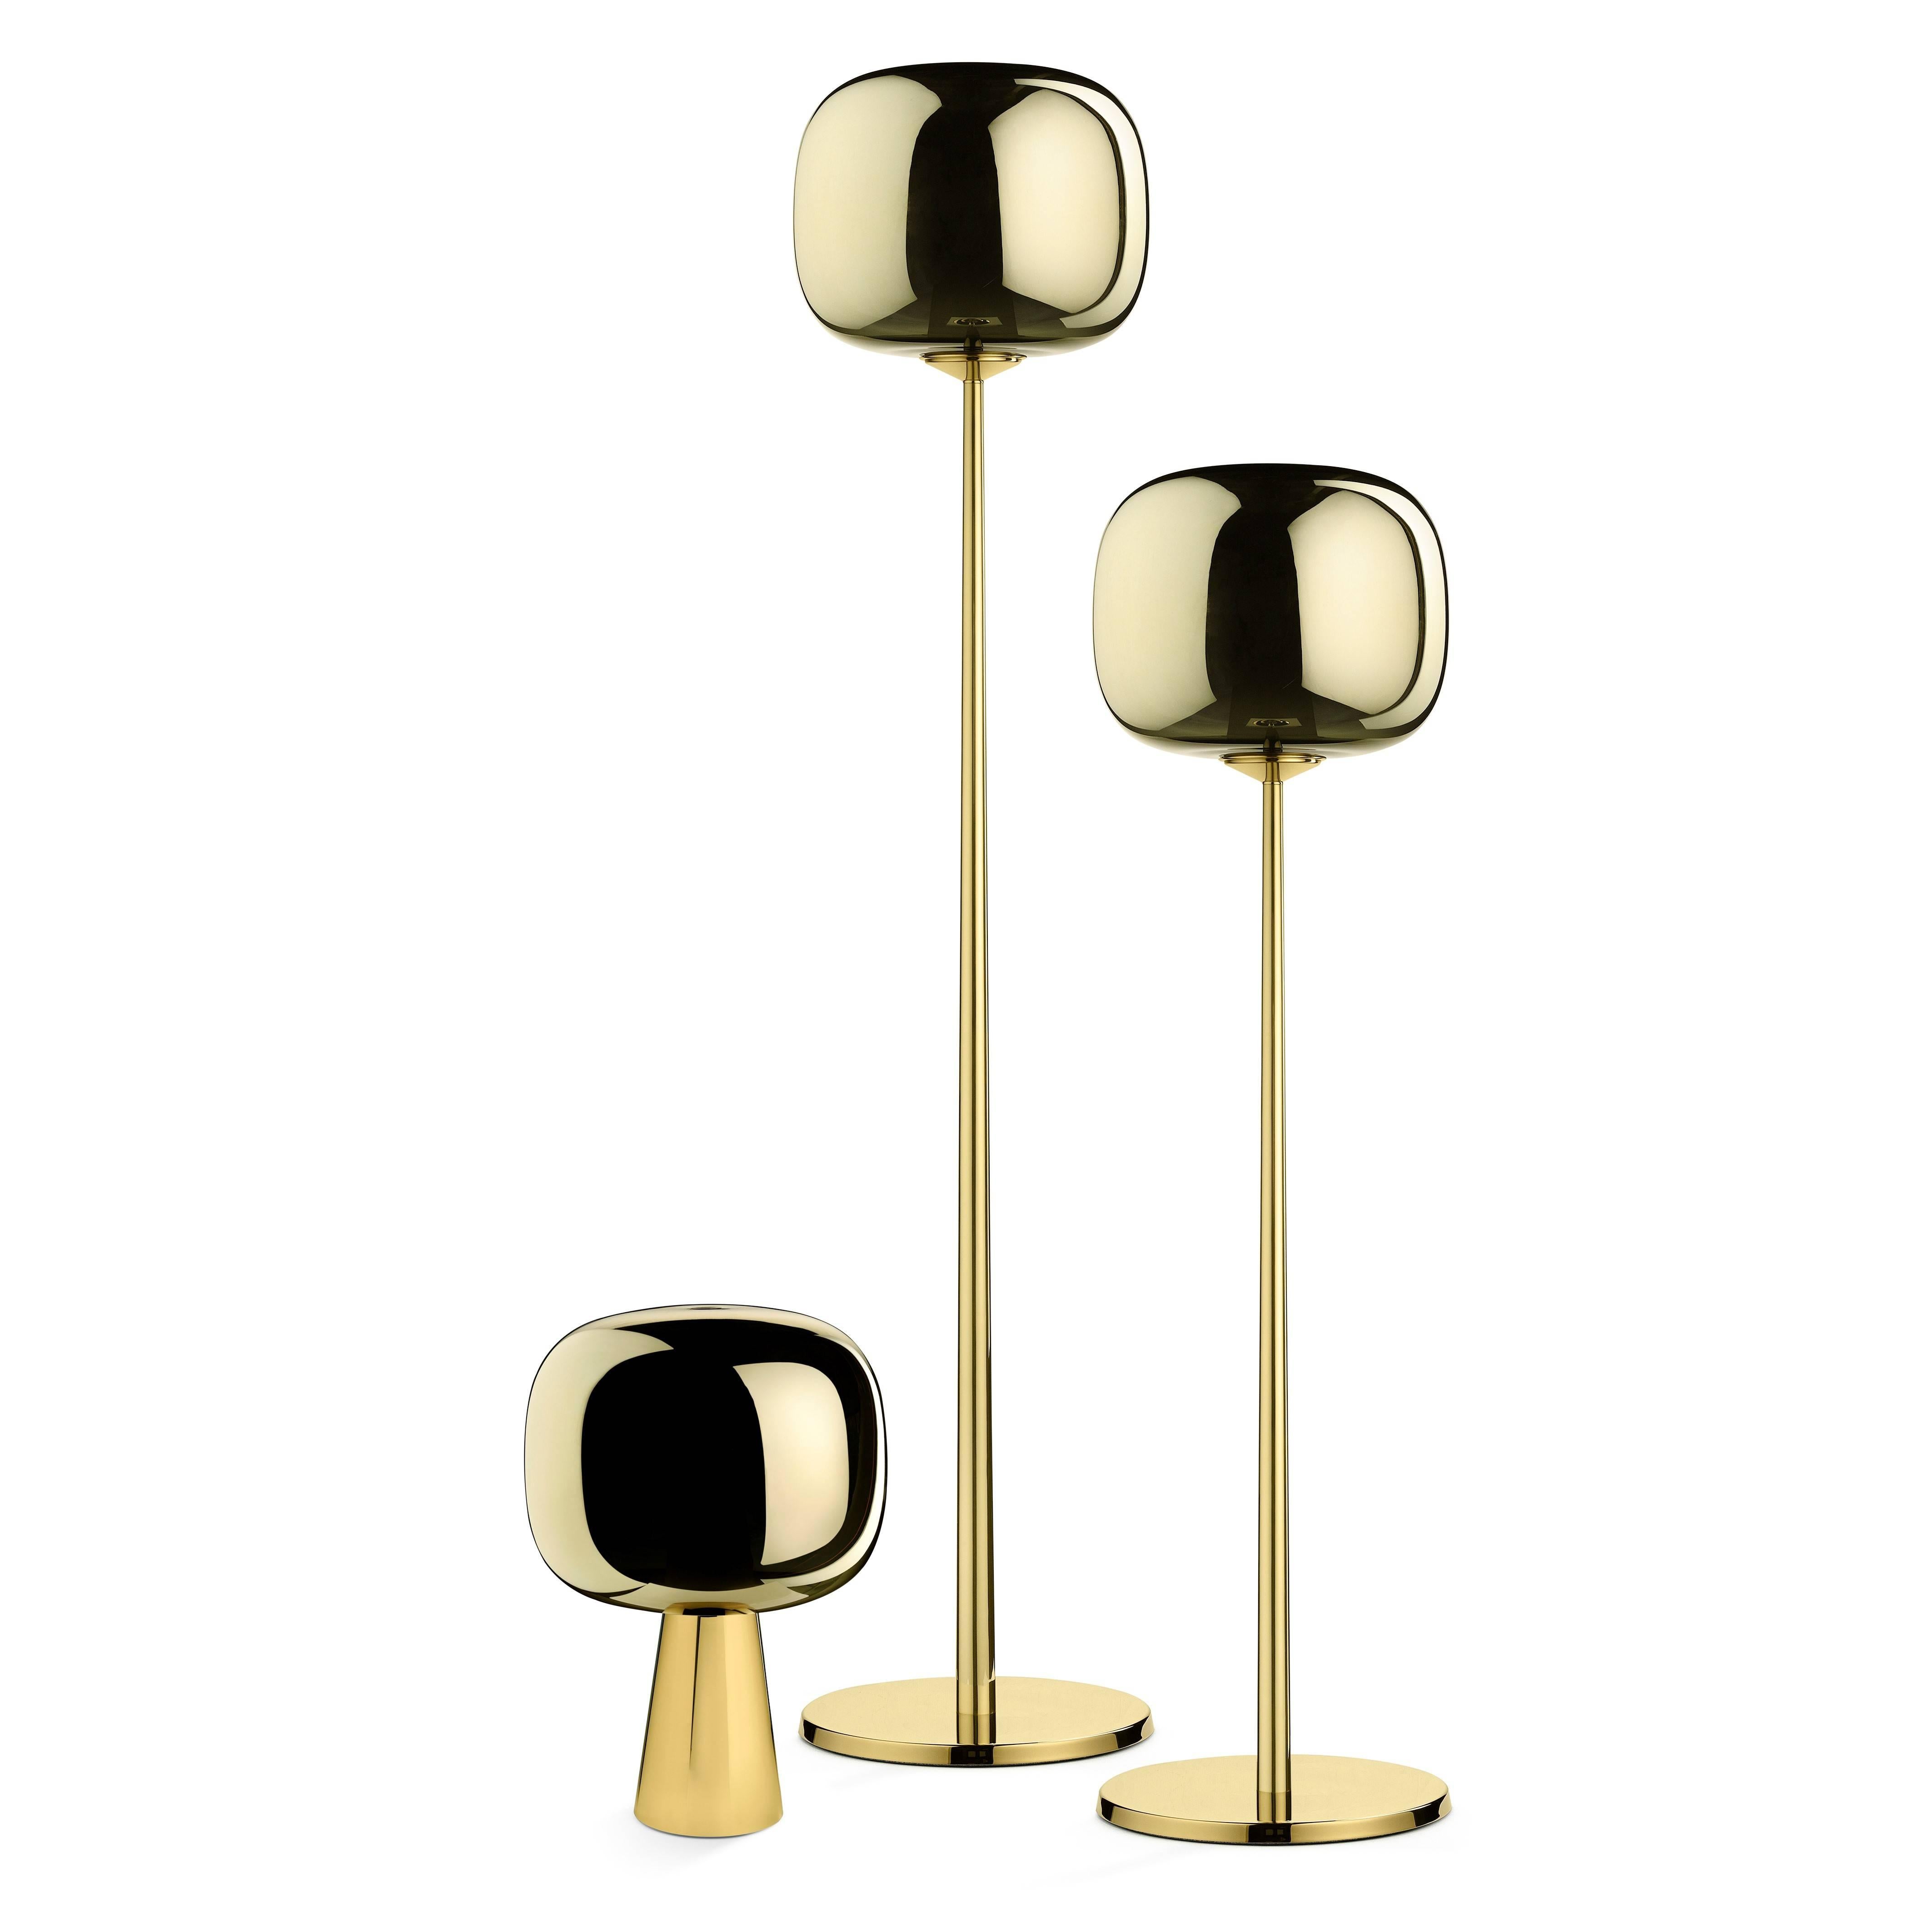 Dusk Dawn table lamp in polished brass and metalized glass.